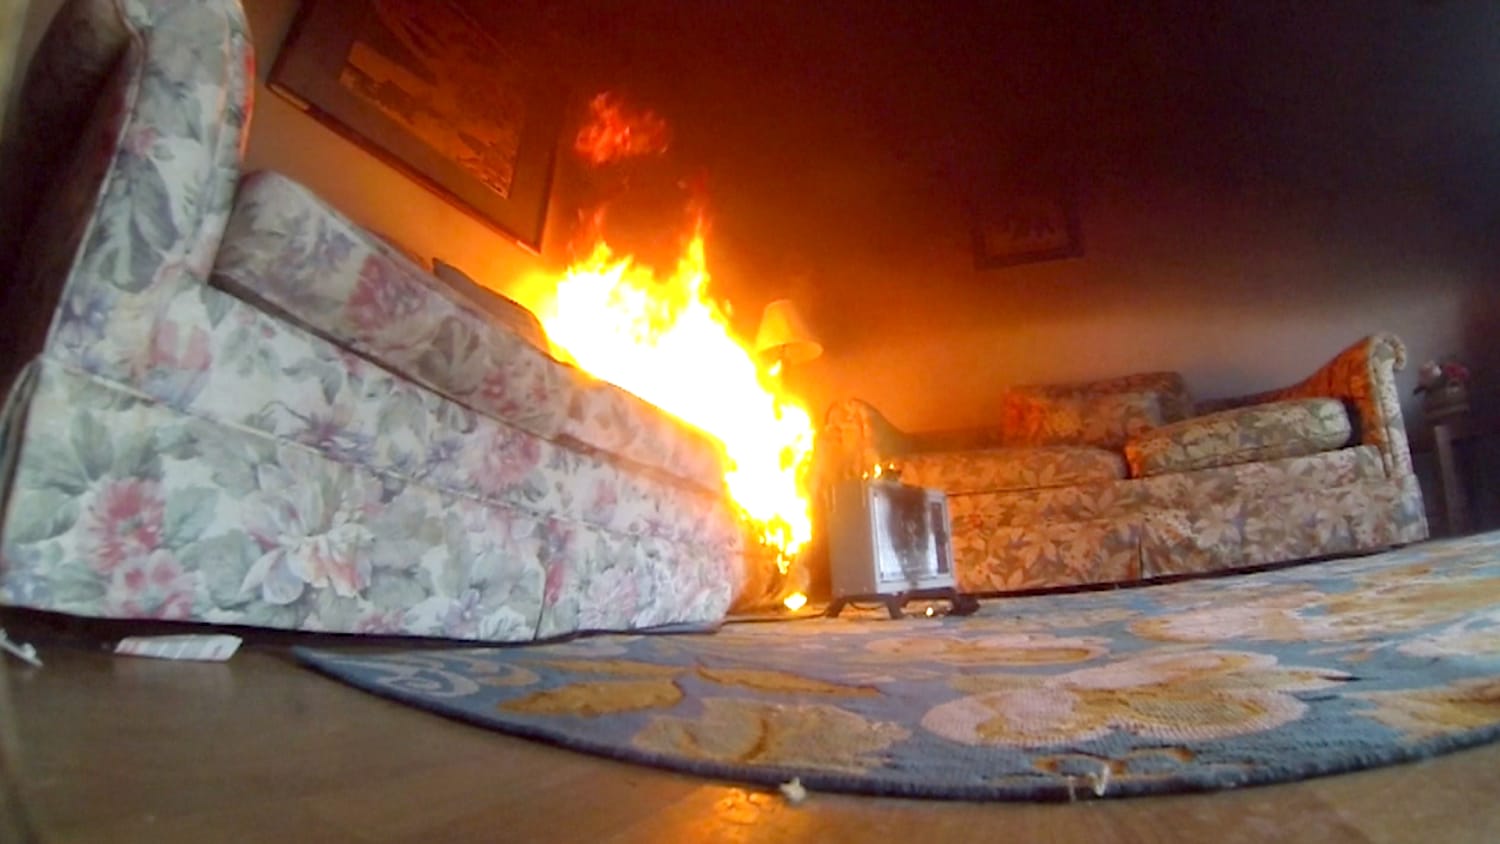 Can a space heater cause a fire?